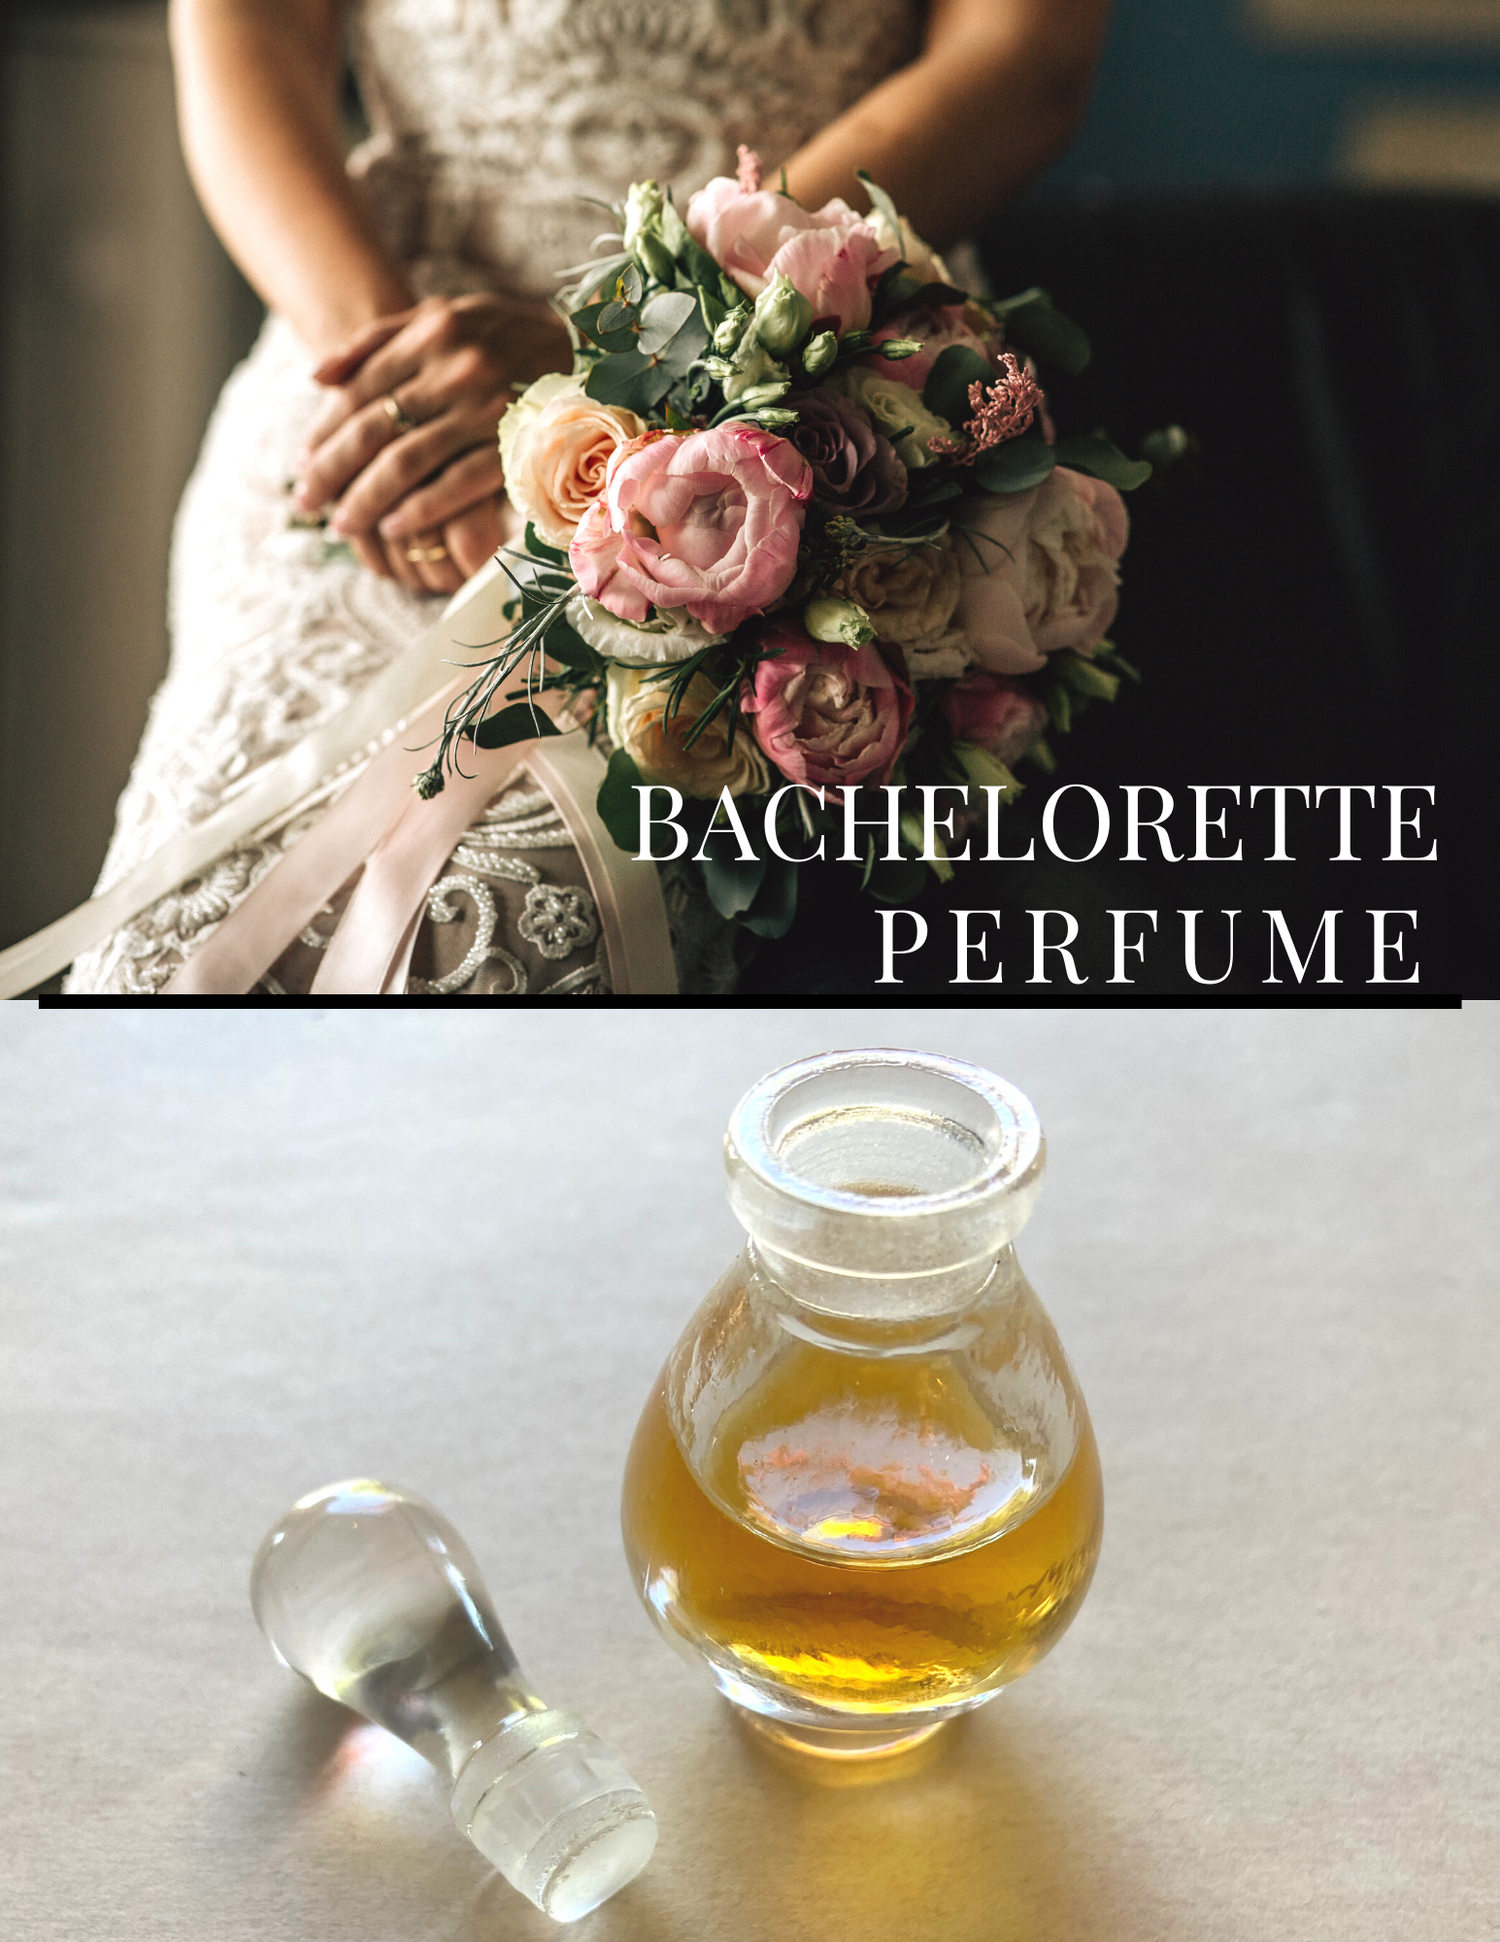 Bridal Perfume / Perfume Bachelorette Party — Collage with Nature